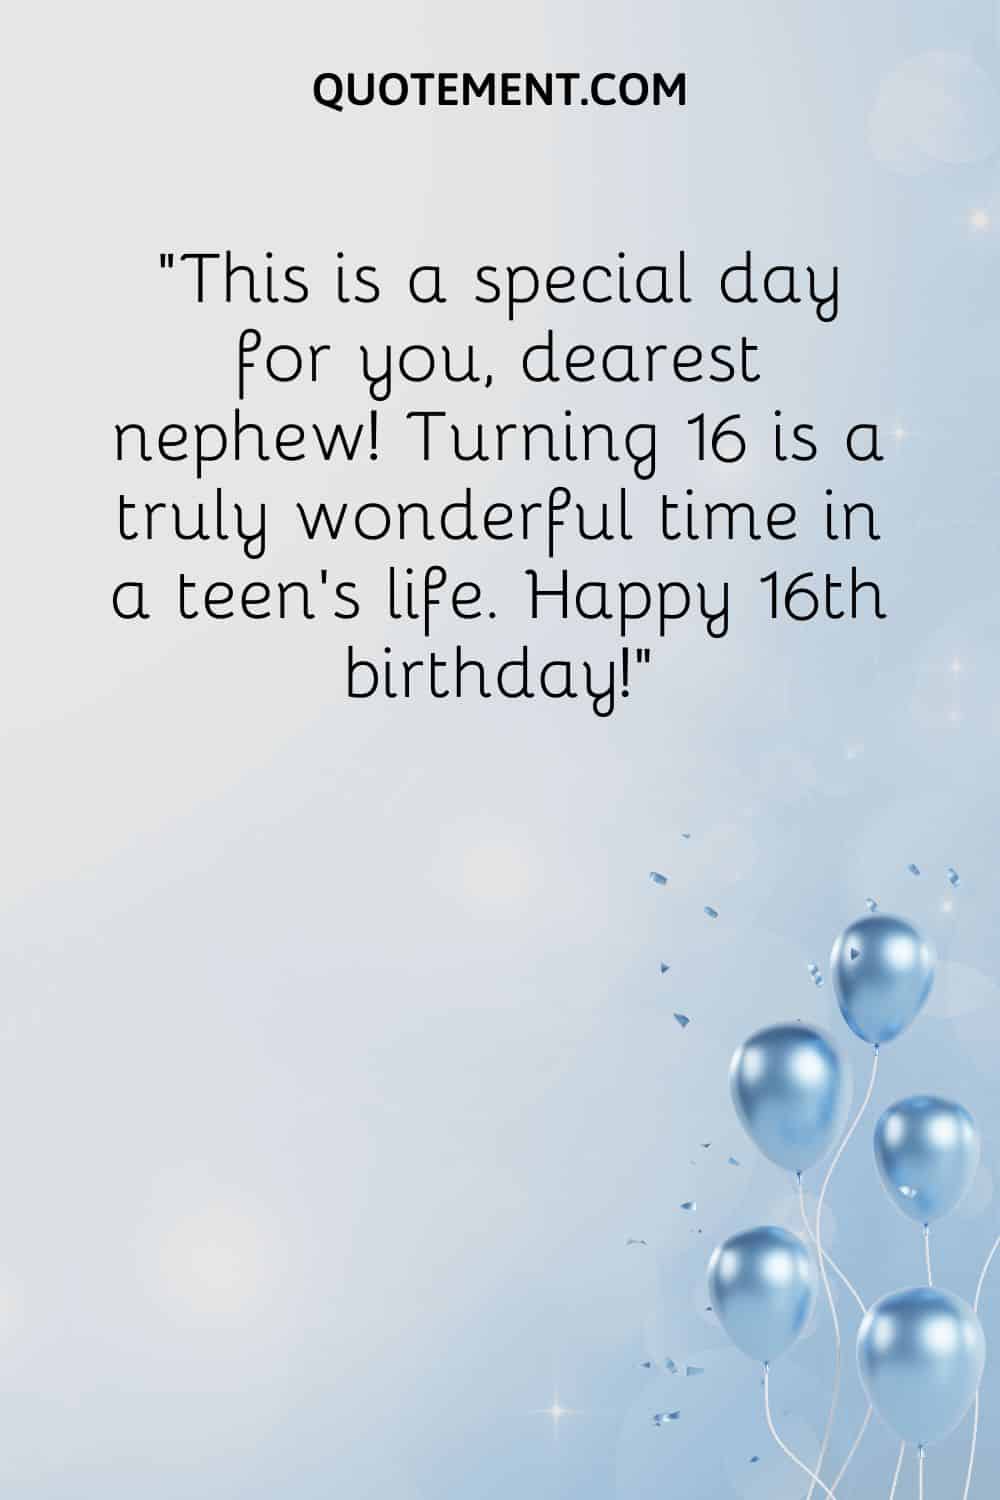 “This is a special day for you, dearest nephew! Turning 16 is a truly wonderful time in a teen’s life. Happy 16th birthday!”